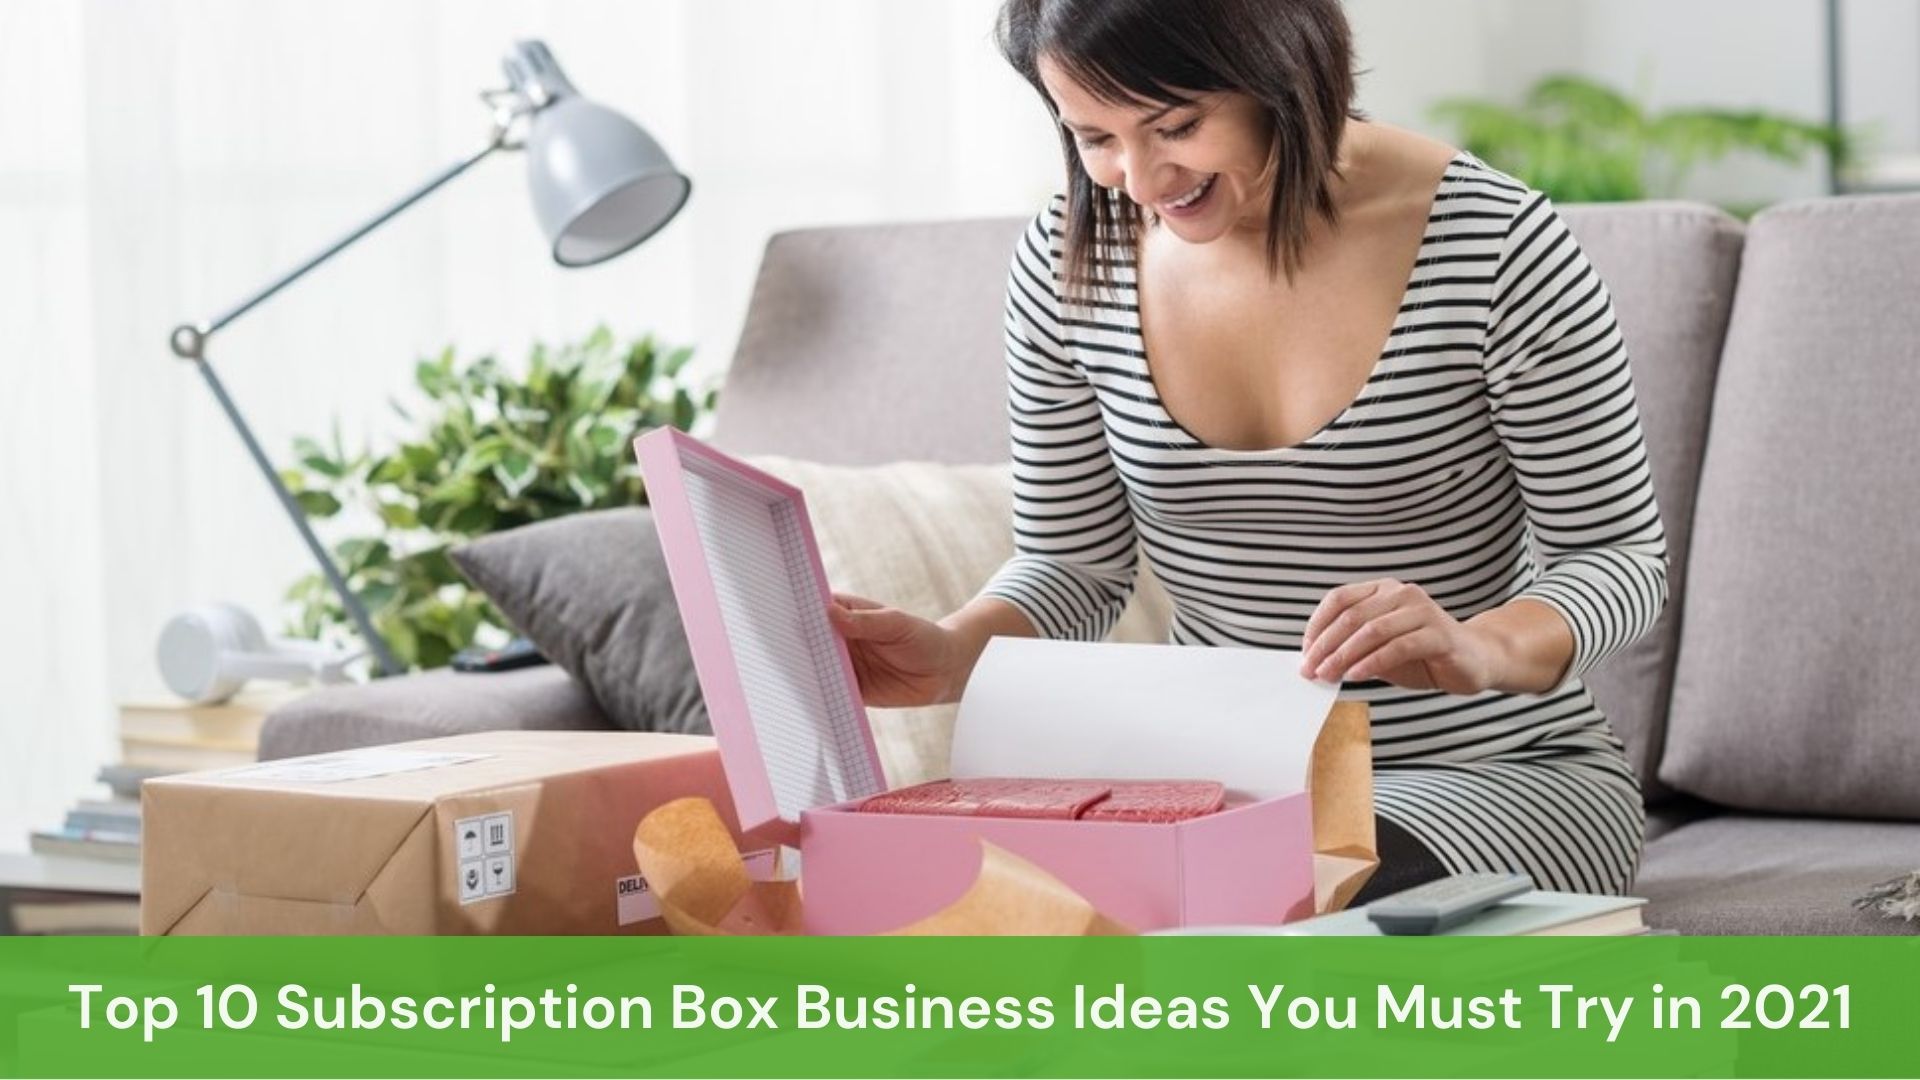 Top 10 Subscription Box Business Ideas You Must Try in 2021